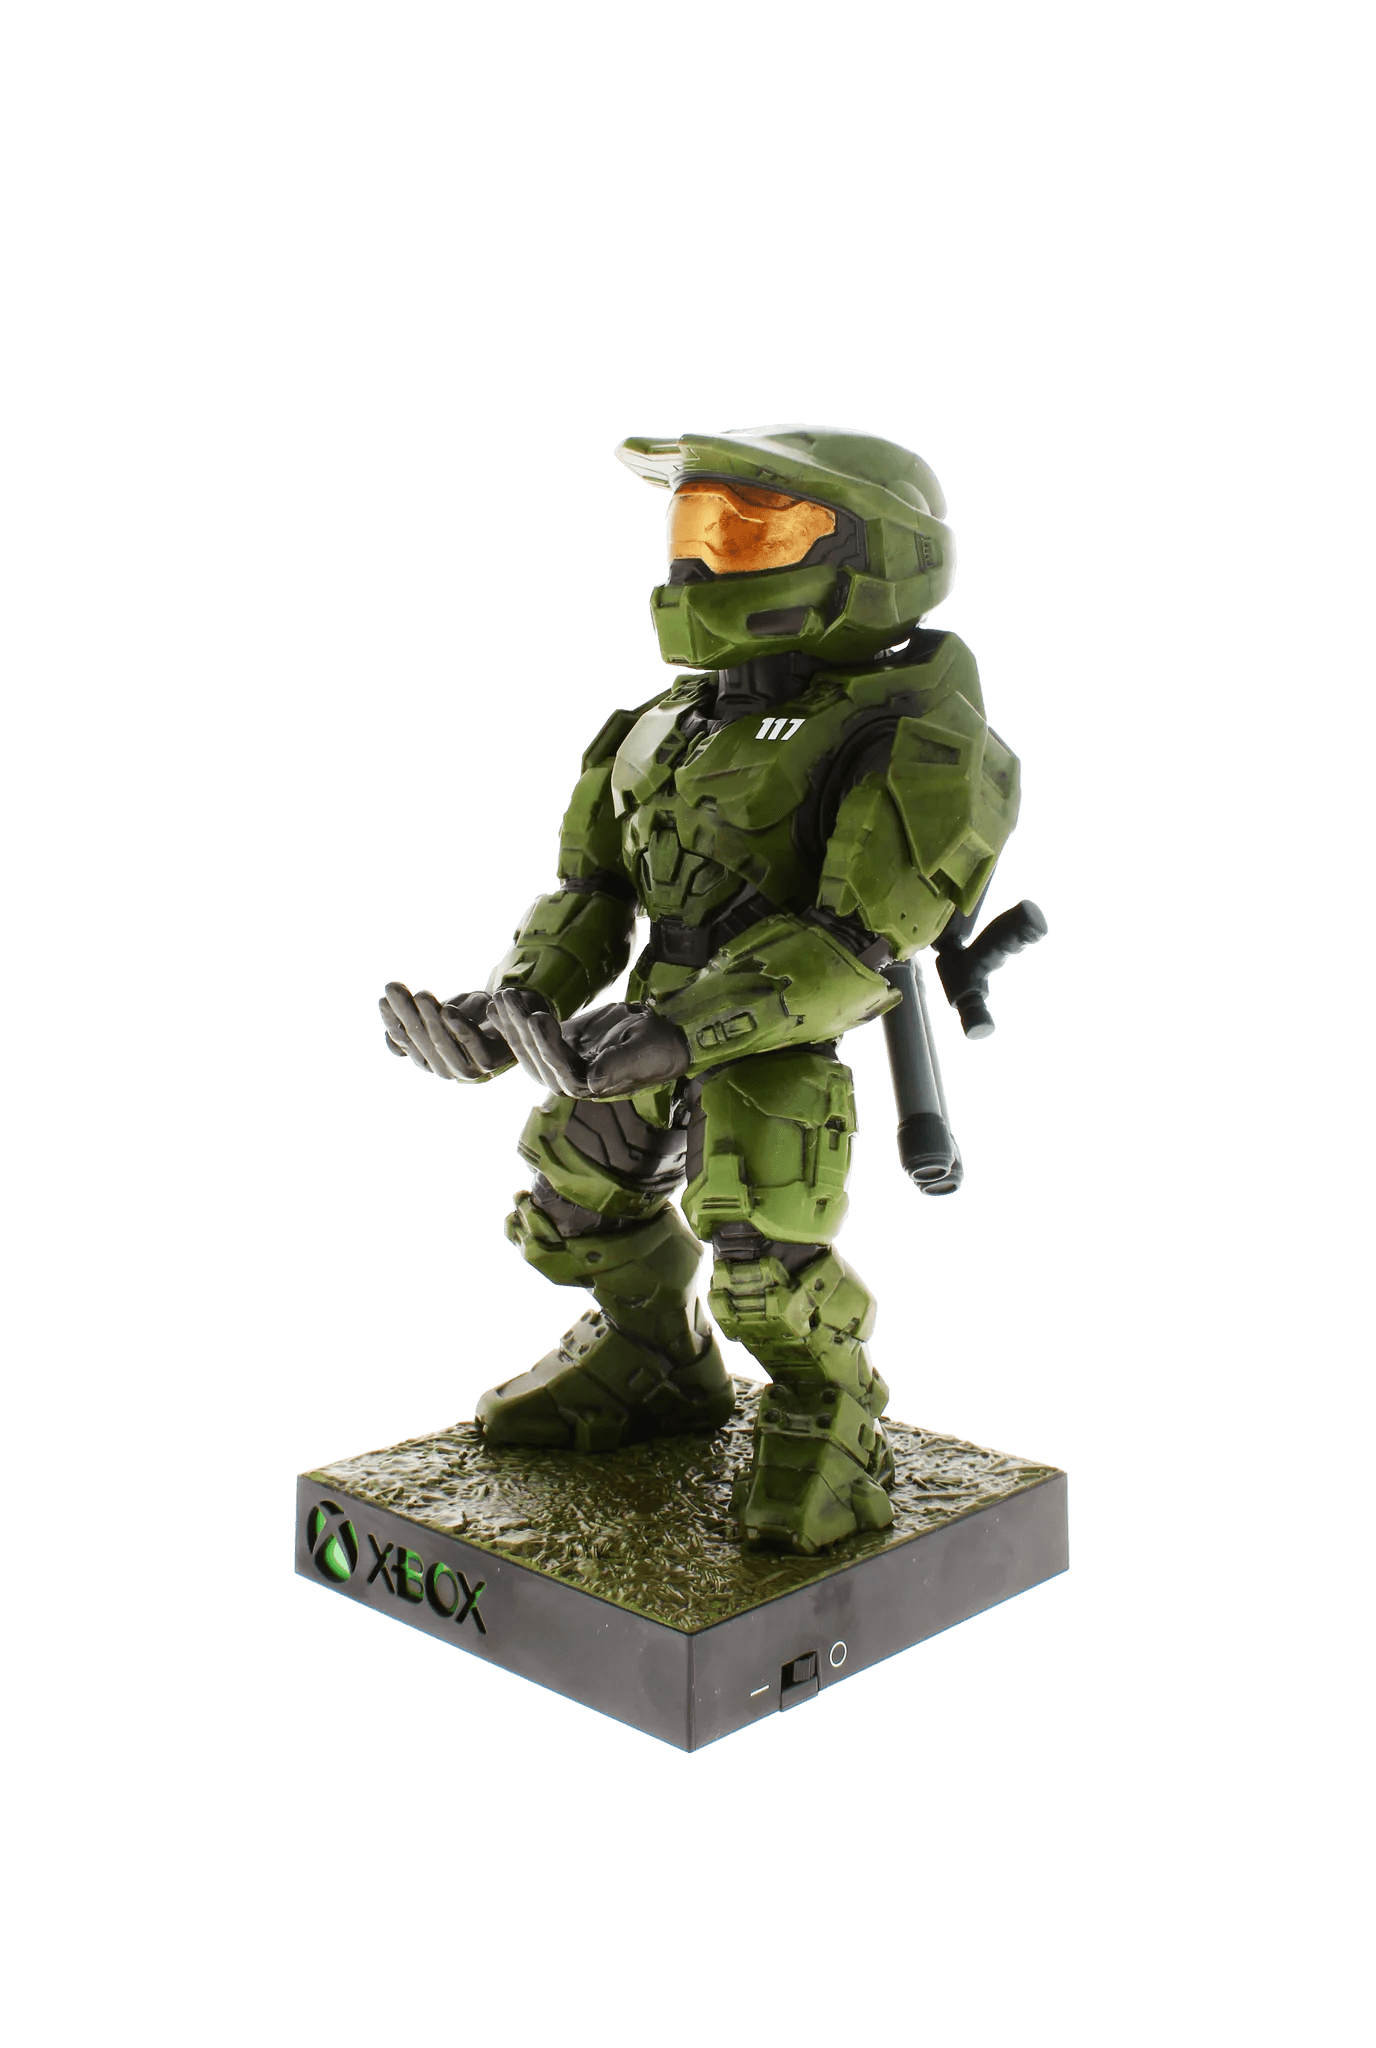 Cable Guys - Halo - Master Chief Exclusive Variant - Phone & Controller Holder - The Card Vault